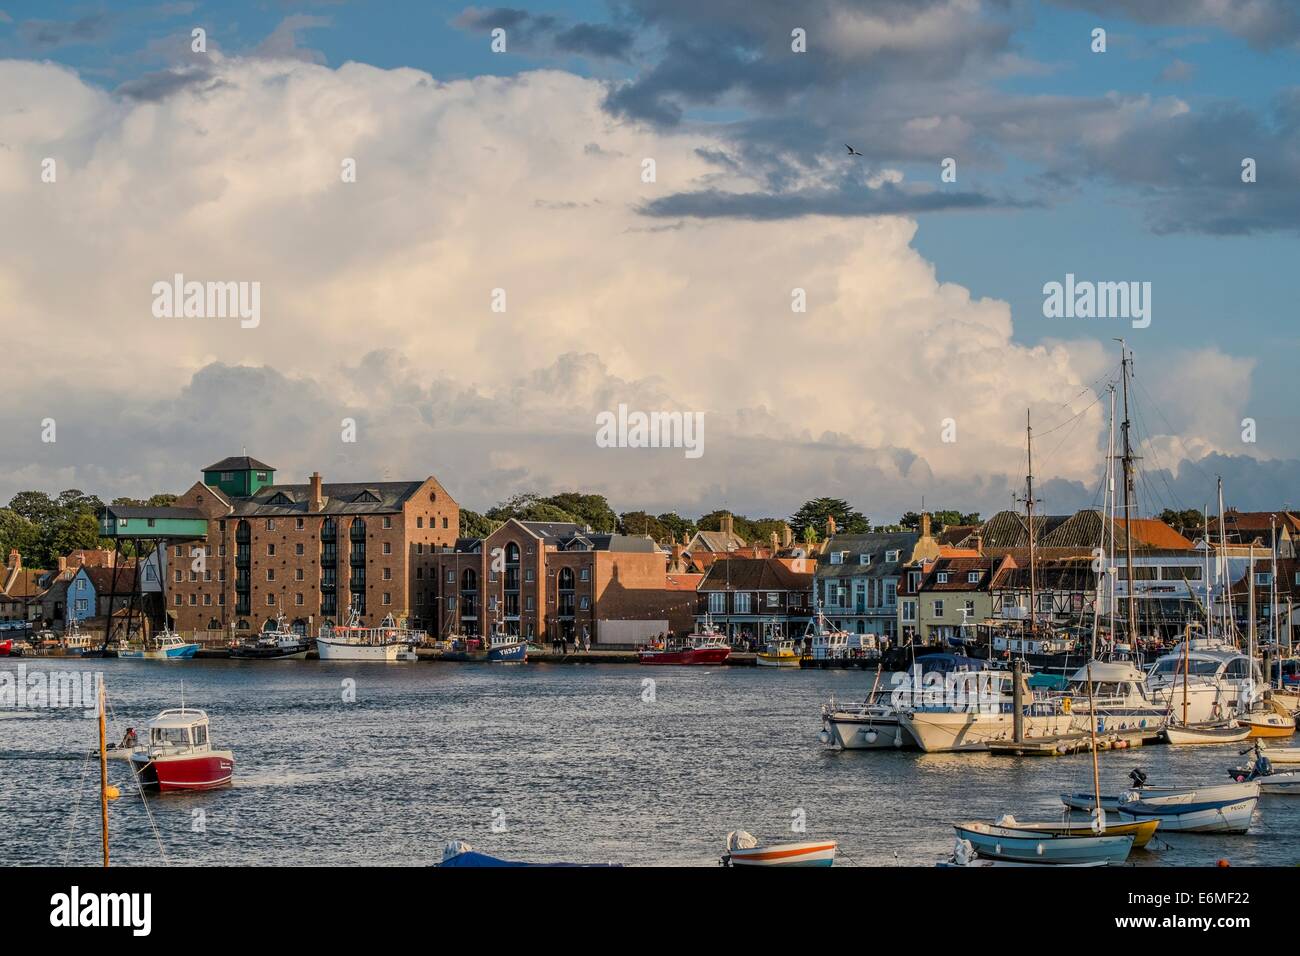 View of the quay at Wells Harbour, featuring the old maltings development. Stock Photo